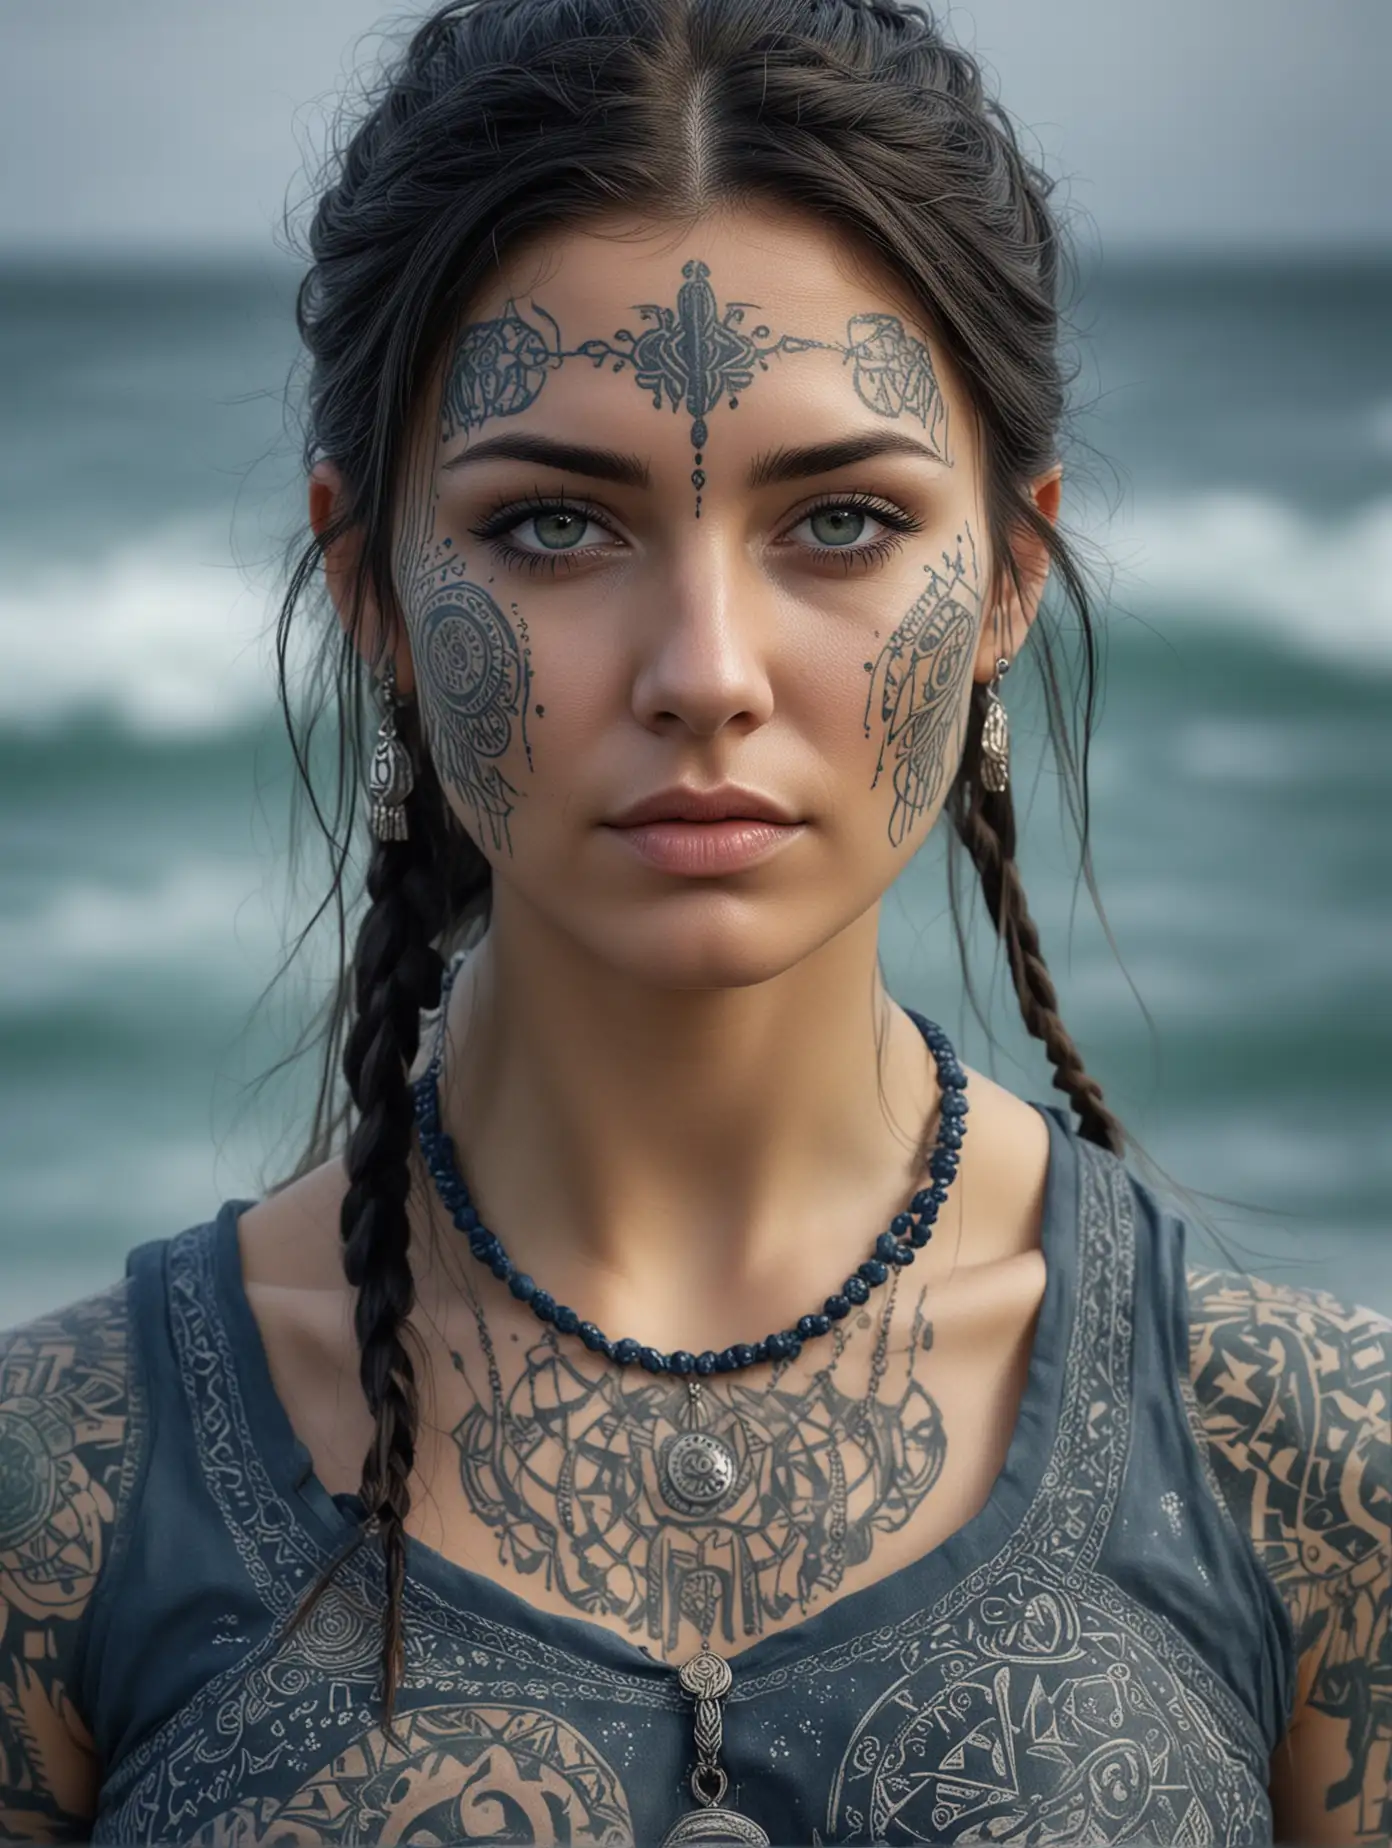 A portrait of a beautiful viking shaman with dark hair, runic tattoos on the face, gray eyes, wearing a dark blue and gray tunic adorned with seashells and many colorful green mystical signs : 1. | Oceanic waters in the back : 1. | Very detailed, wet, nordic atmosphere : 1. | Highly detailed,high precision,focus on textures, hyperrealistic : 1.